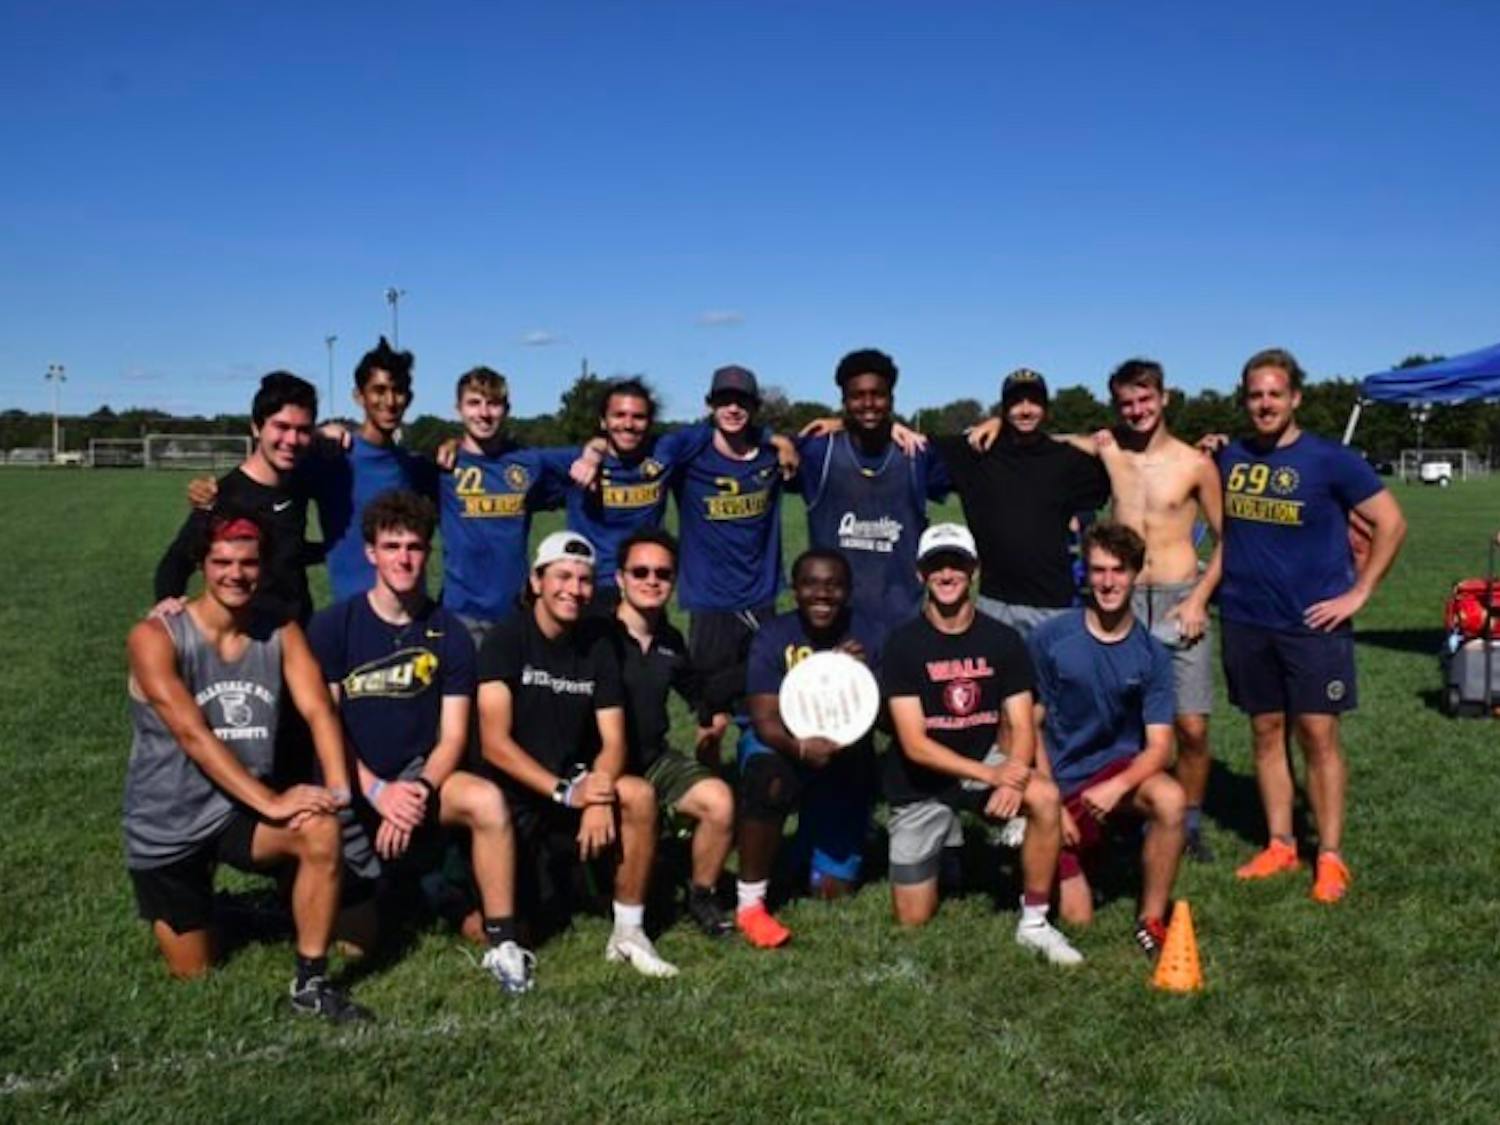 The Men’s Ultimate Frisbee team at the College is back and competing once again (Photo courtesy of Brian Nigro).